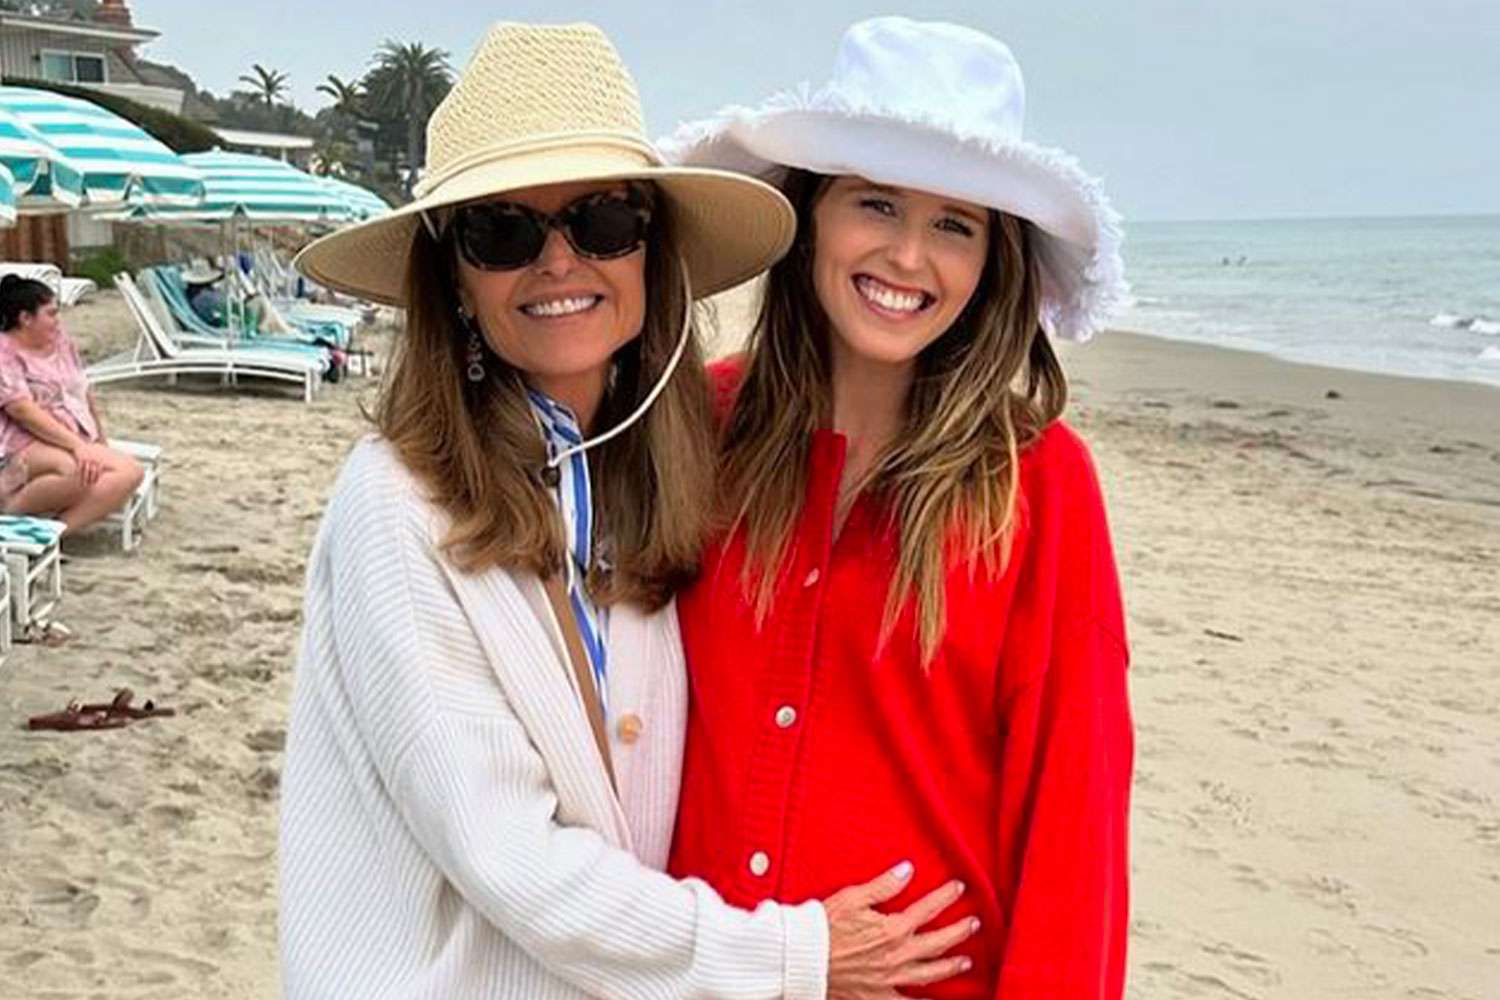 Pregnant Katherine Schwarzenegger Has Chic Beach Day with Maria Shriver: 'We're Doing Just Fine'